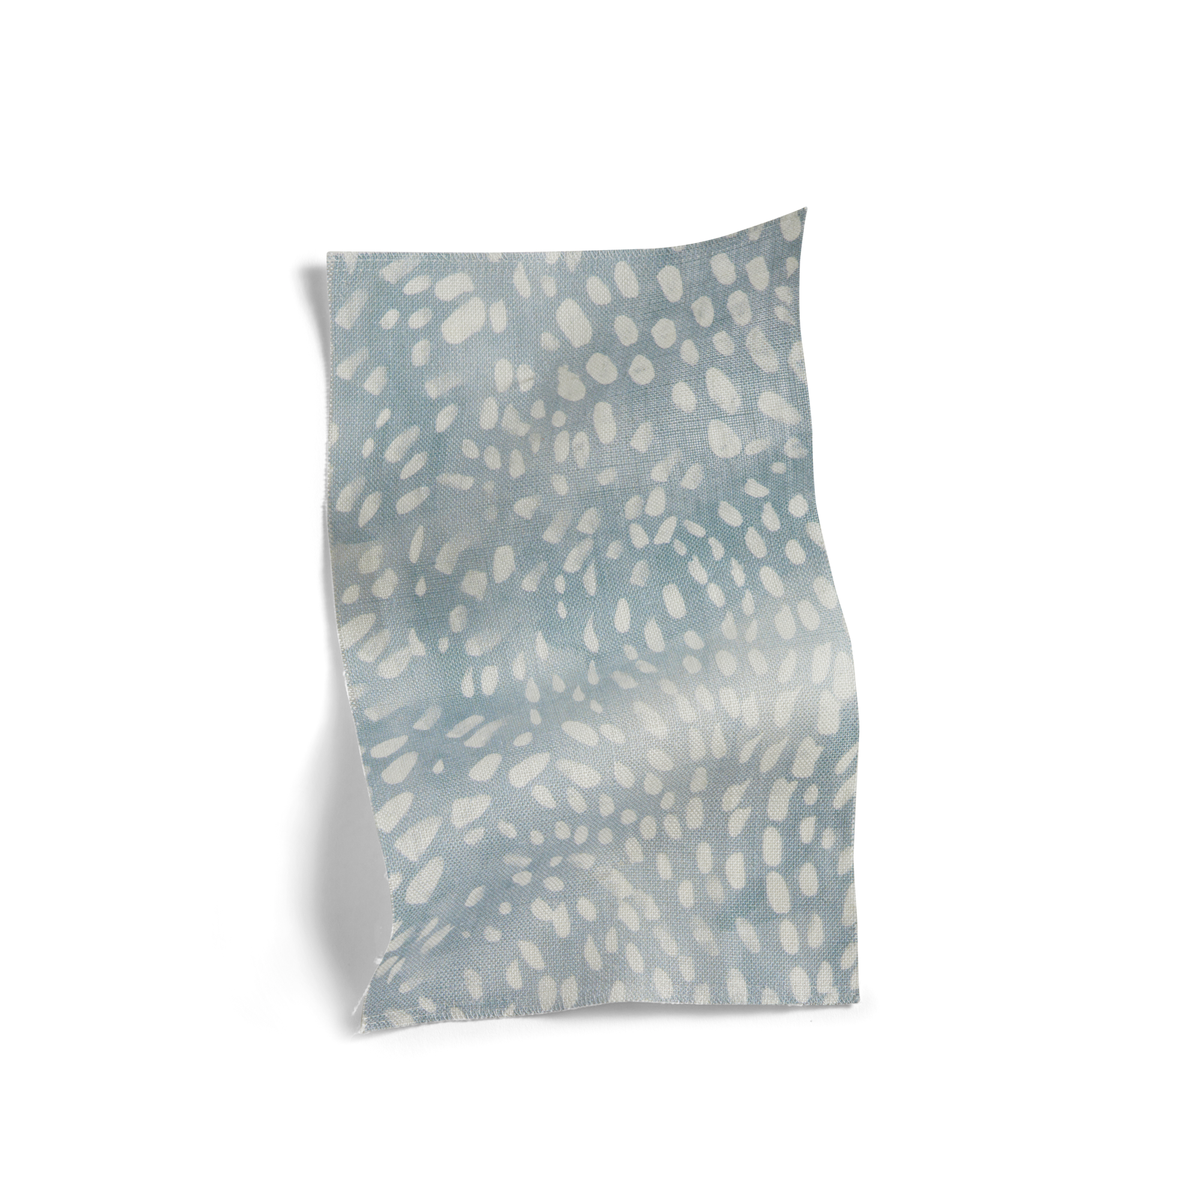 Speckled Fabric in Cloud Blue